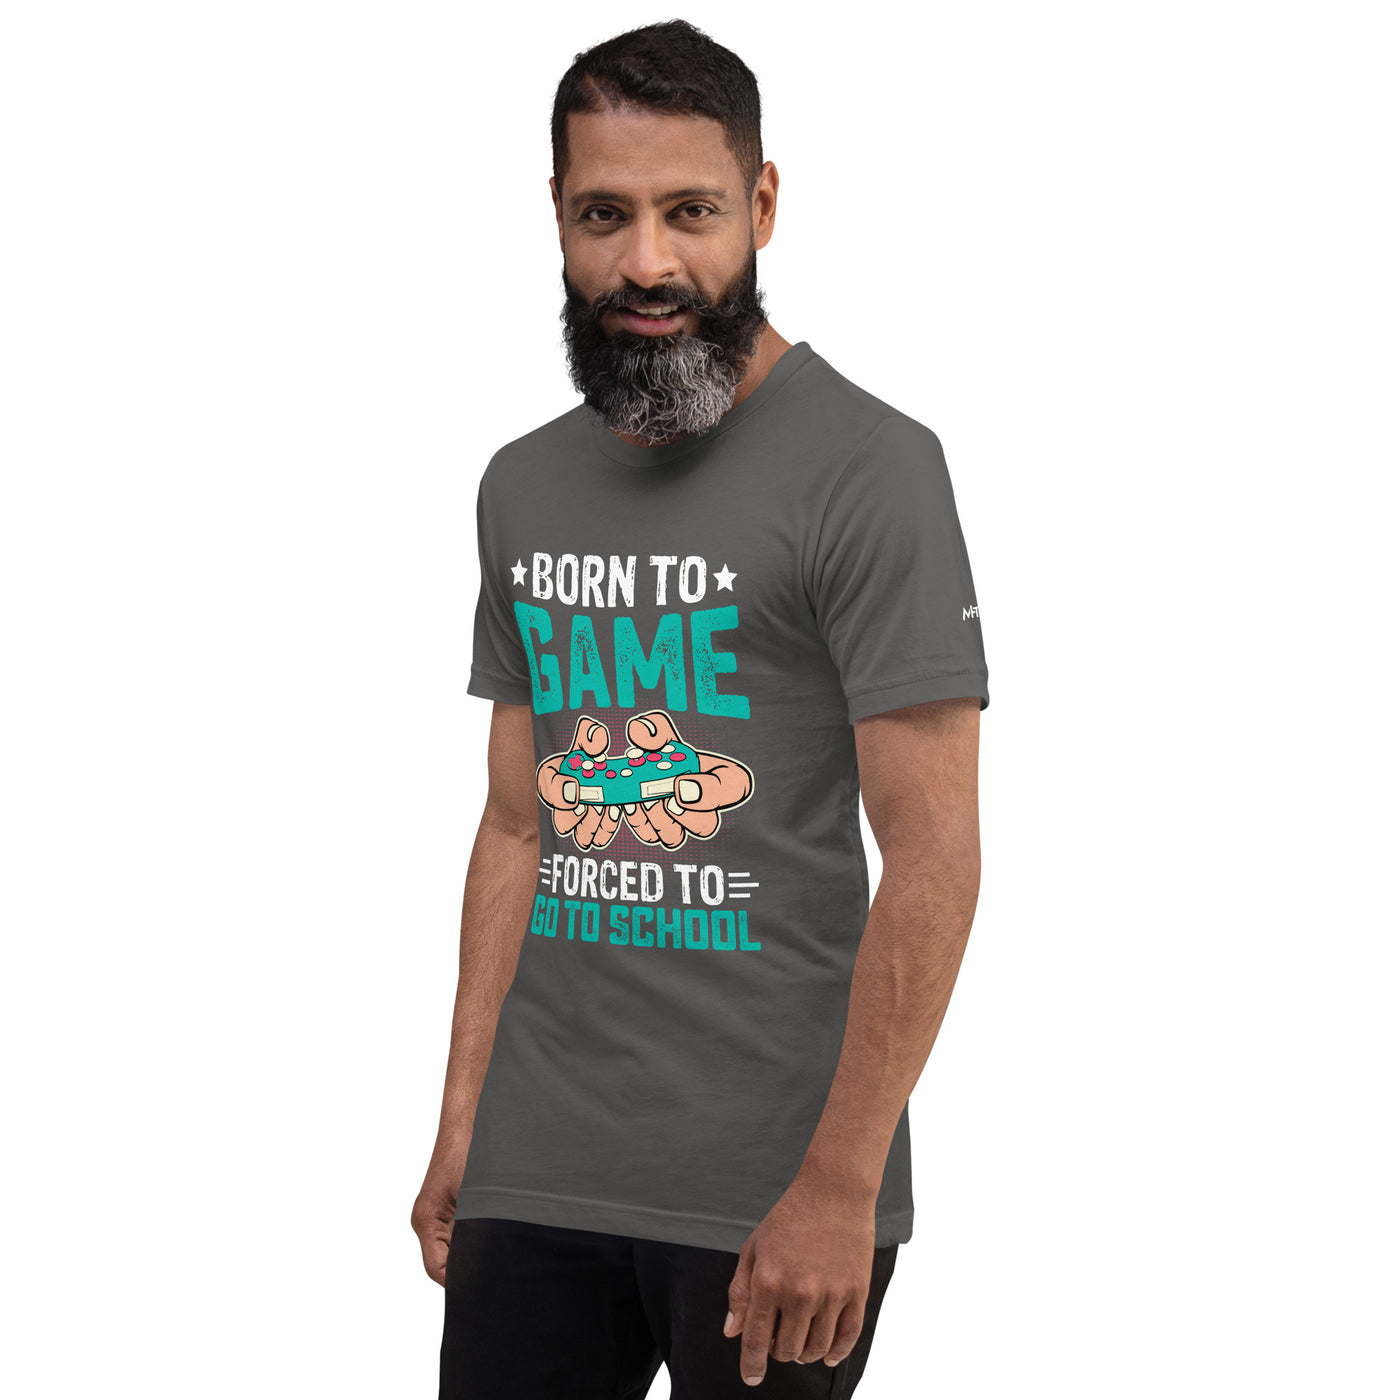 Born to Game, Forced to School - Unisex t-shirt